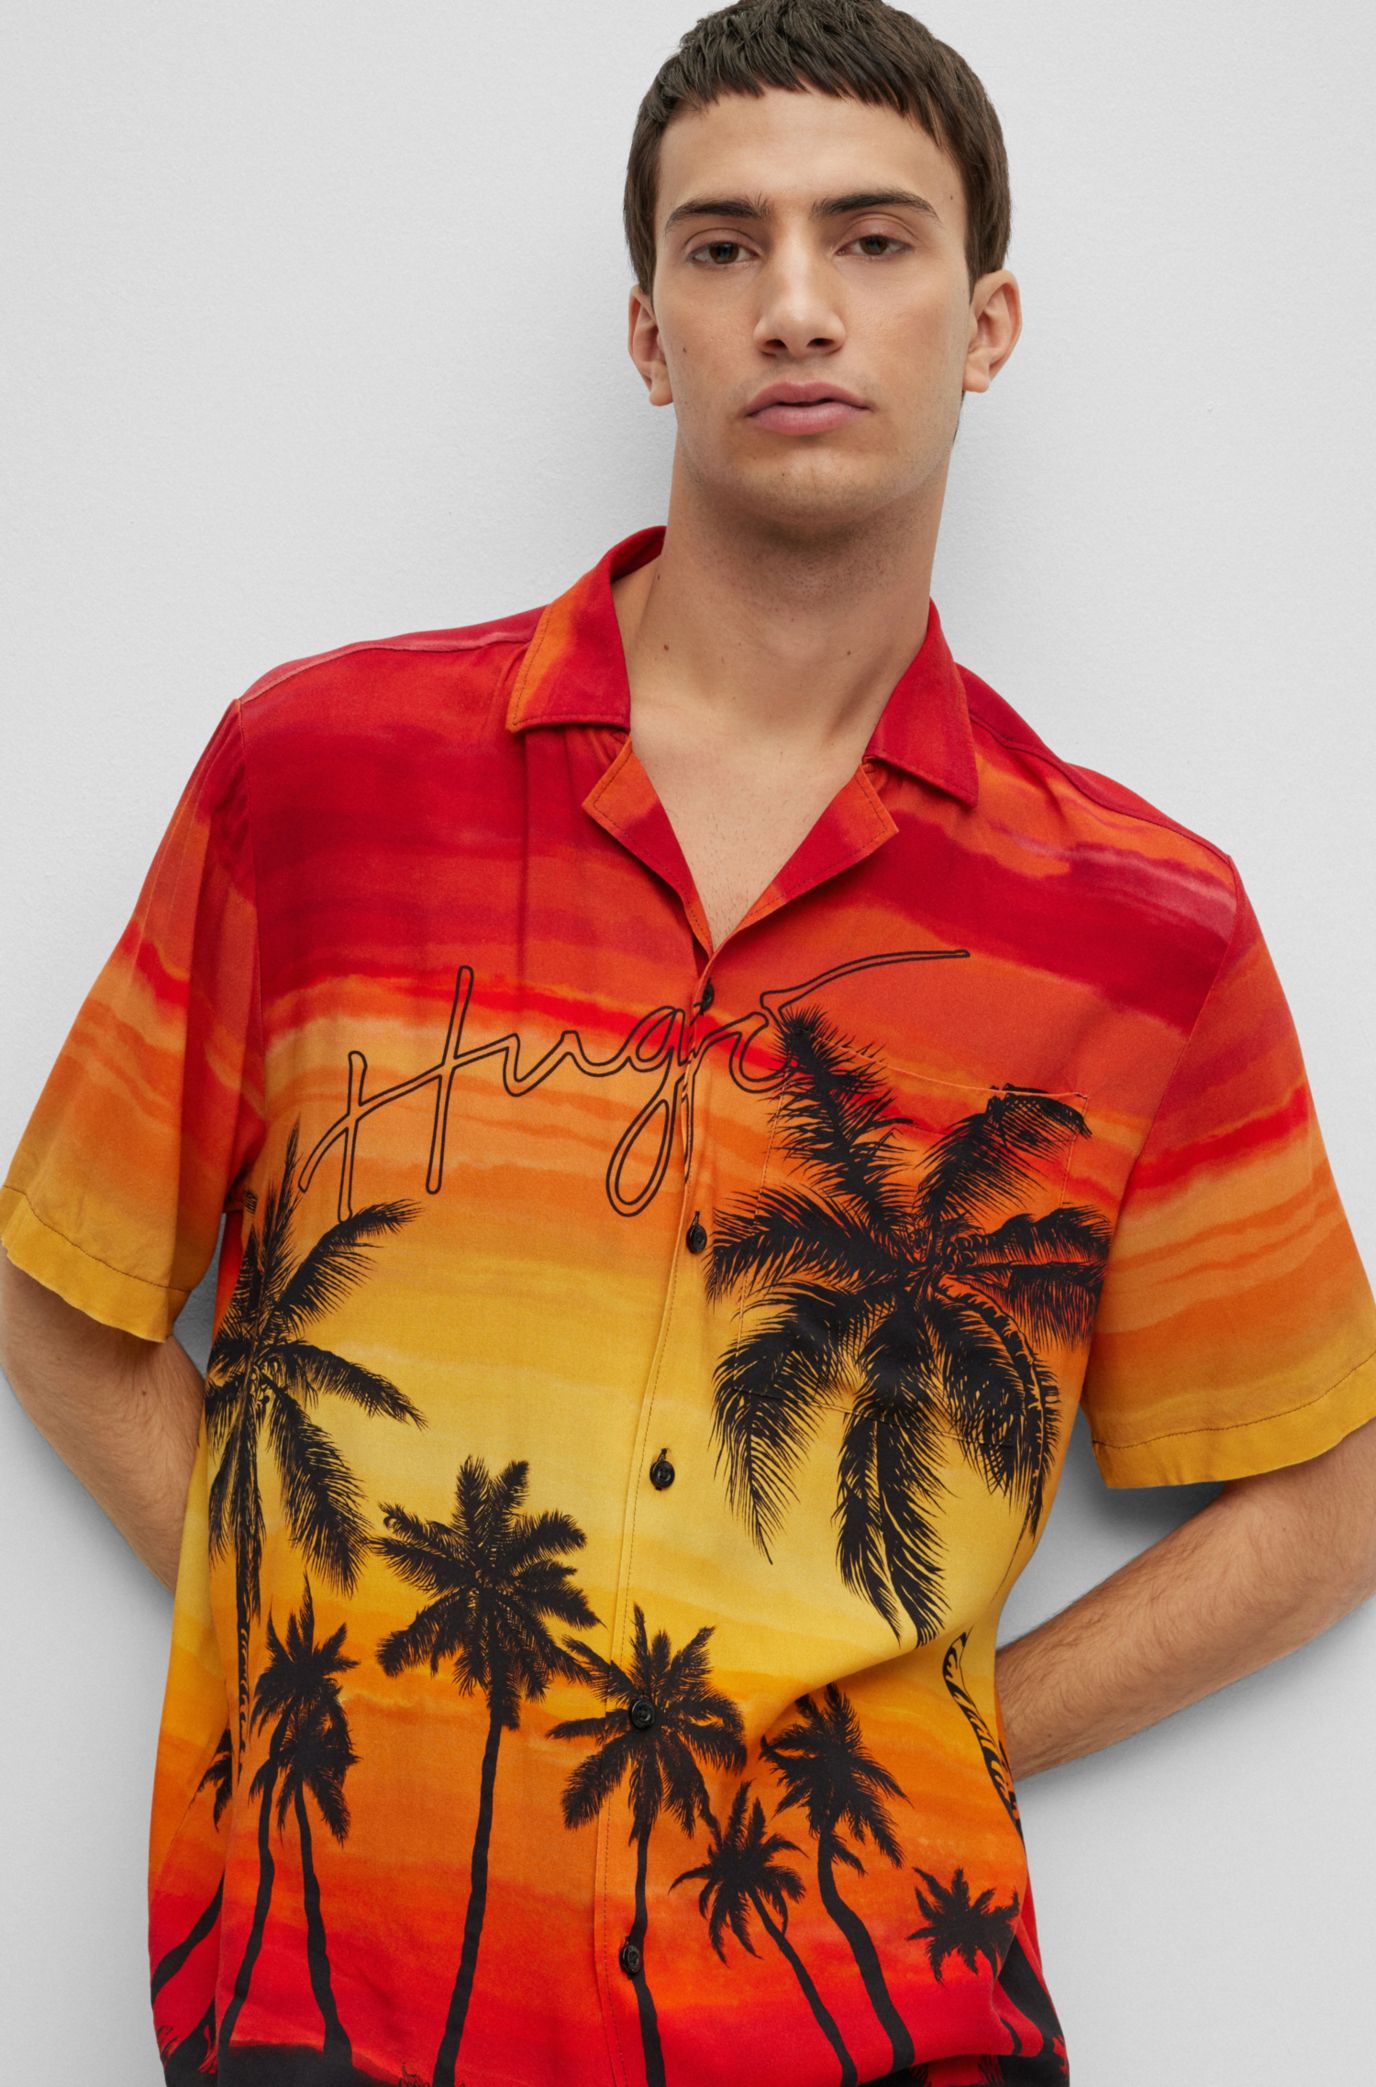 HUGO shirt handwritten palm logo and with - Relaxed-fit print